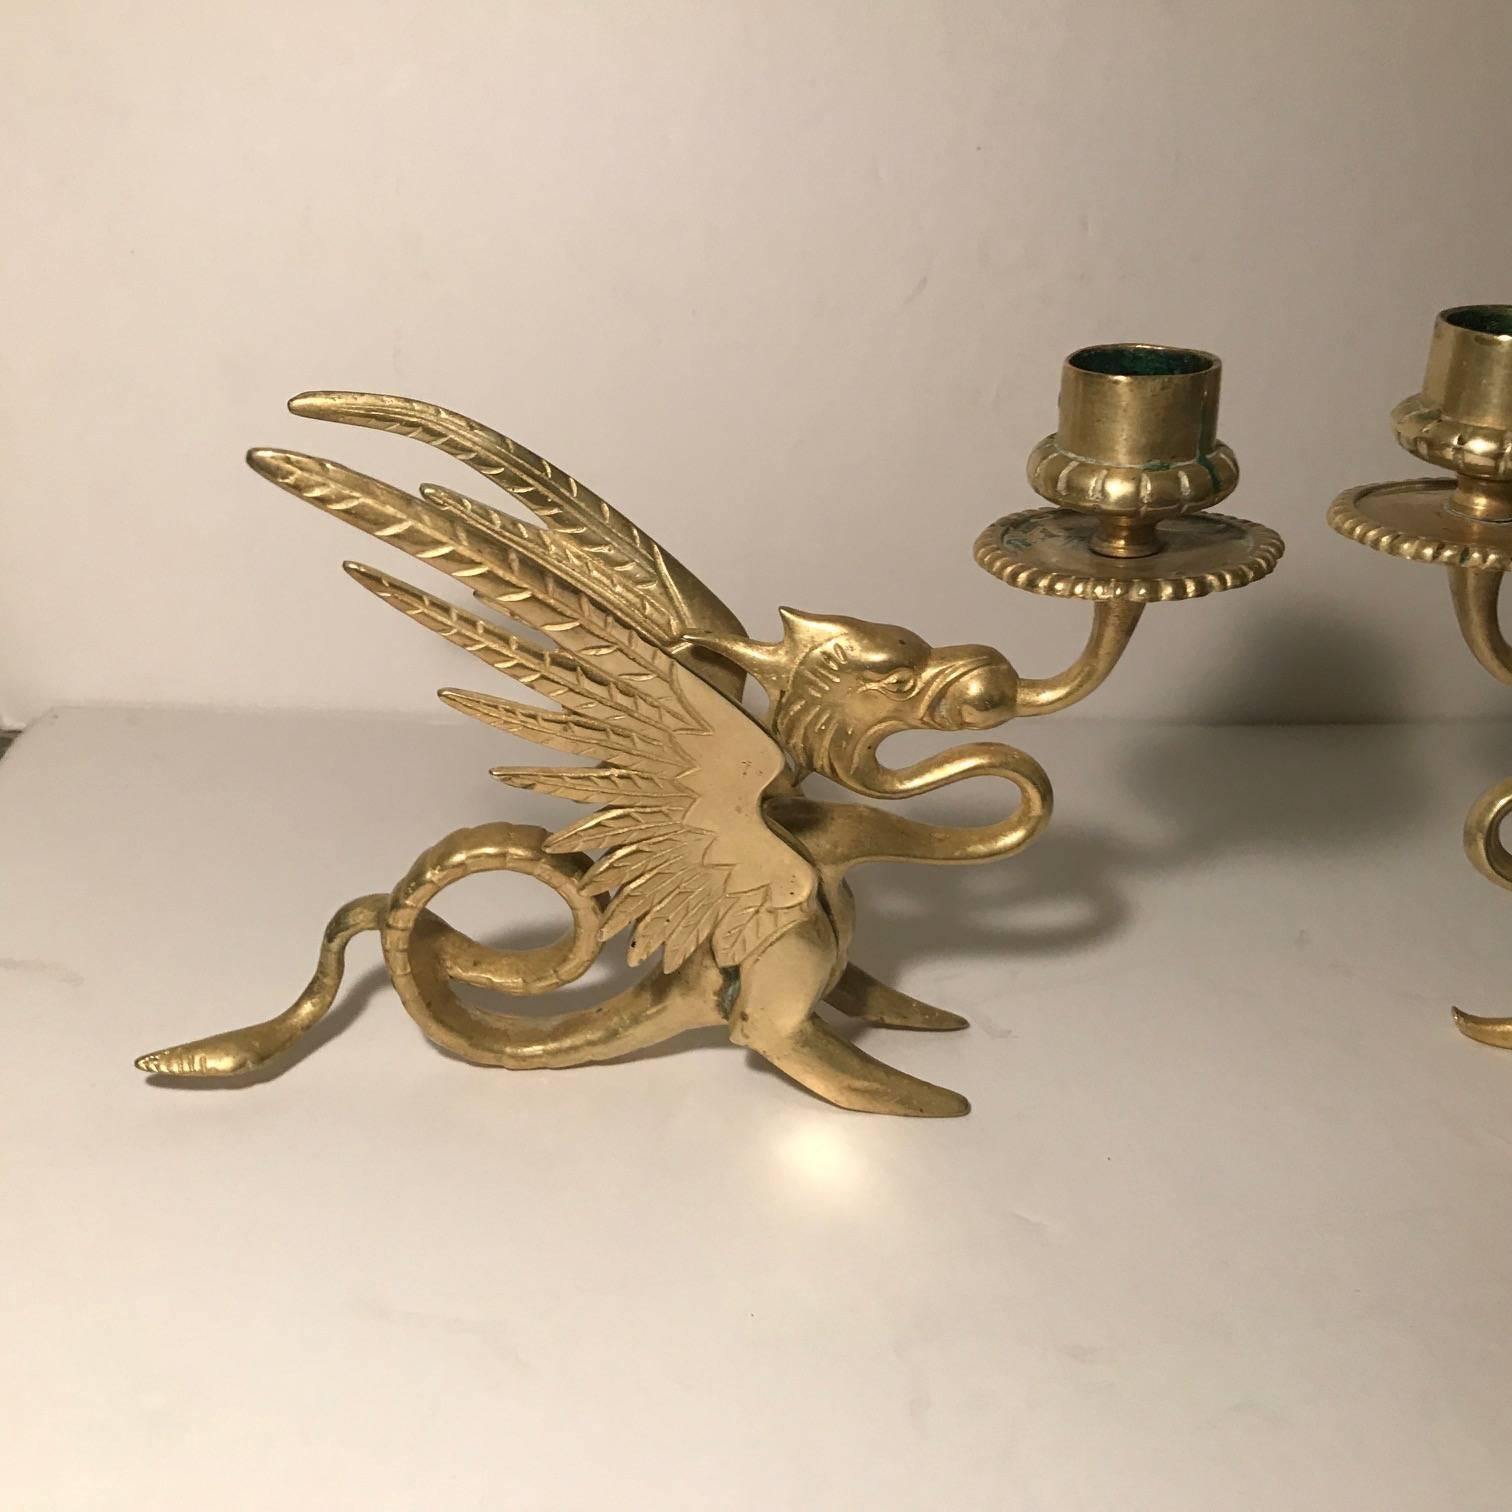 A pair of gilt brass Griffin motif candlesticks. The winged figure with a curled tail which is the finger ring to use as a chamber stick.